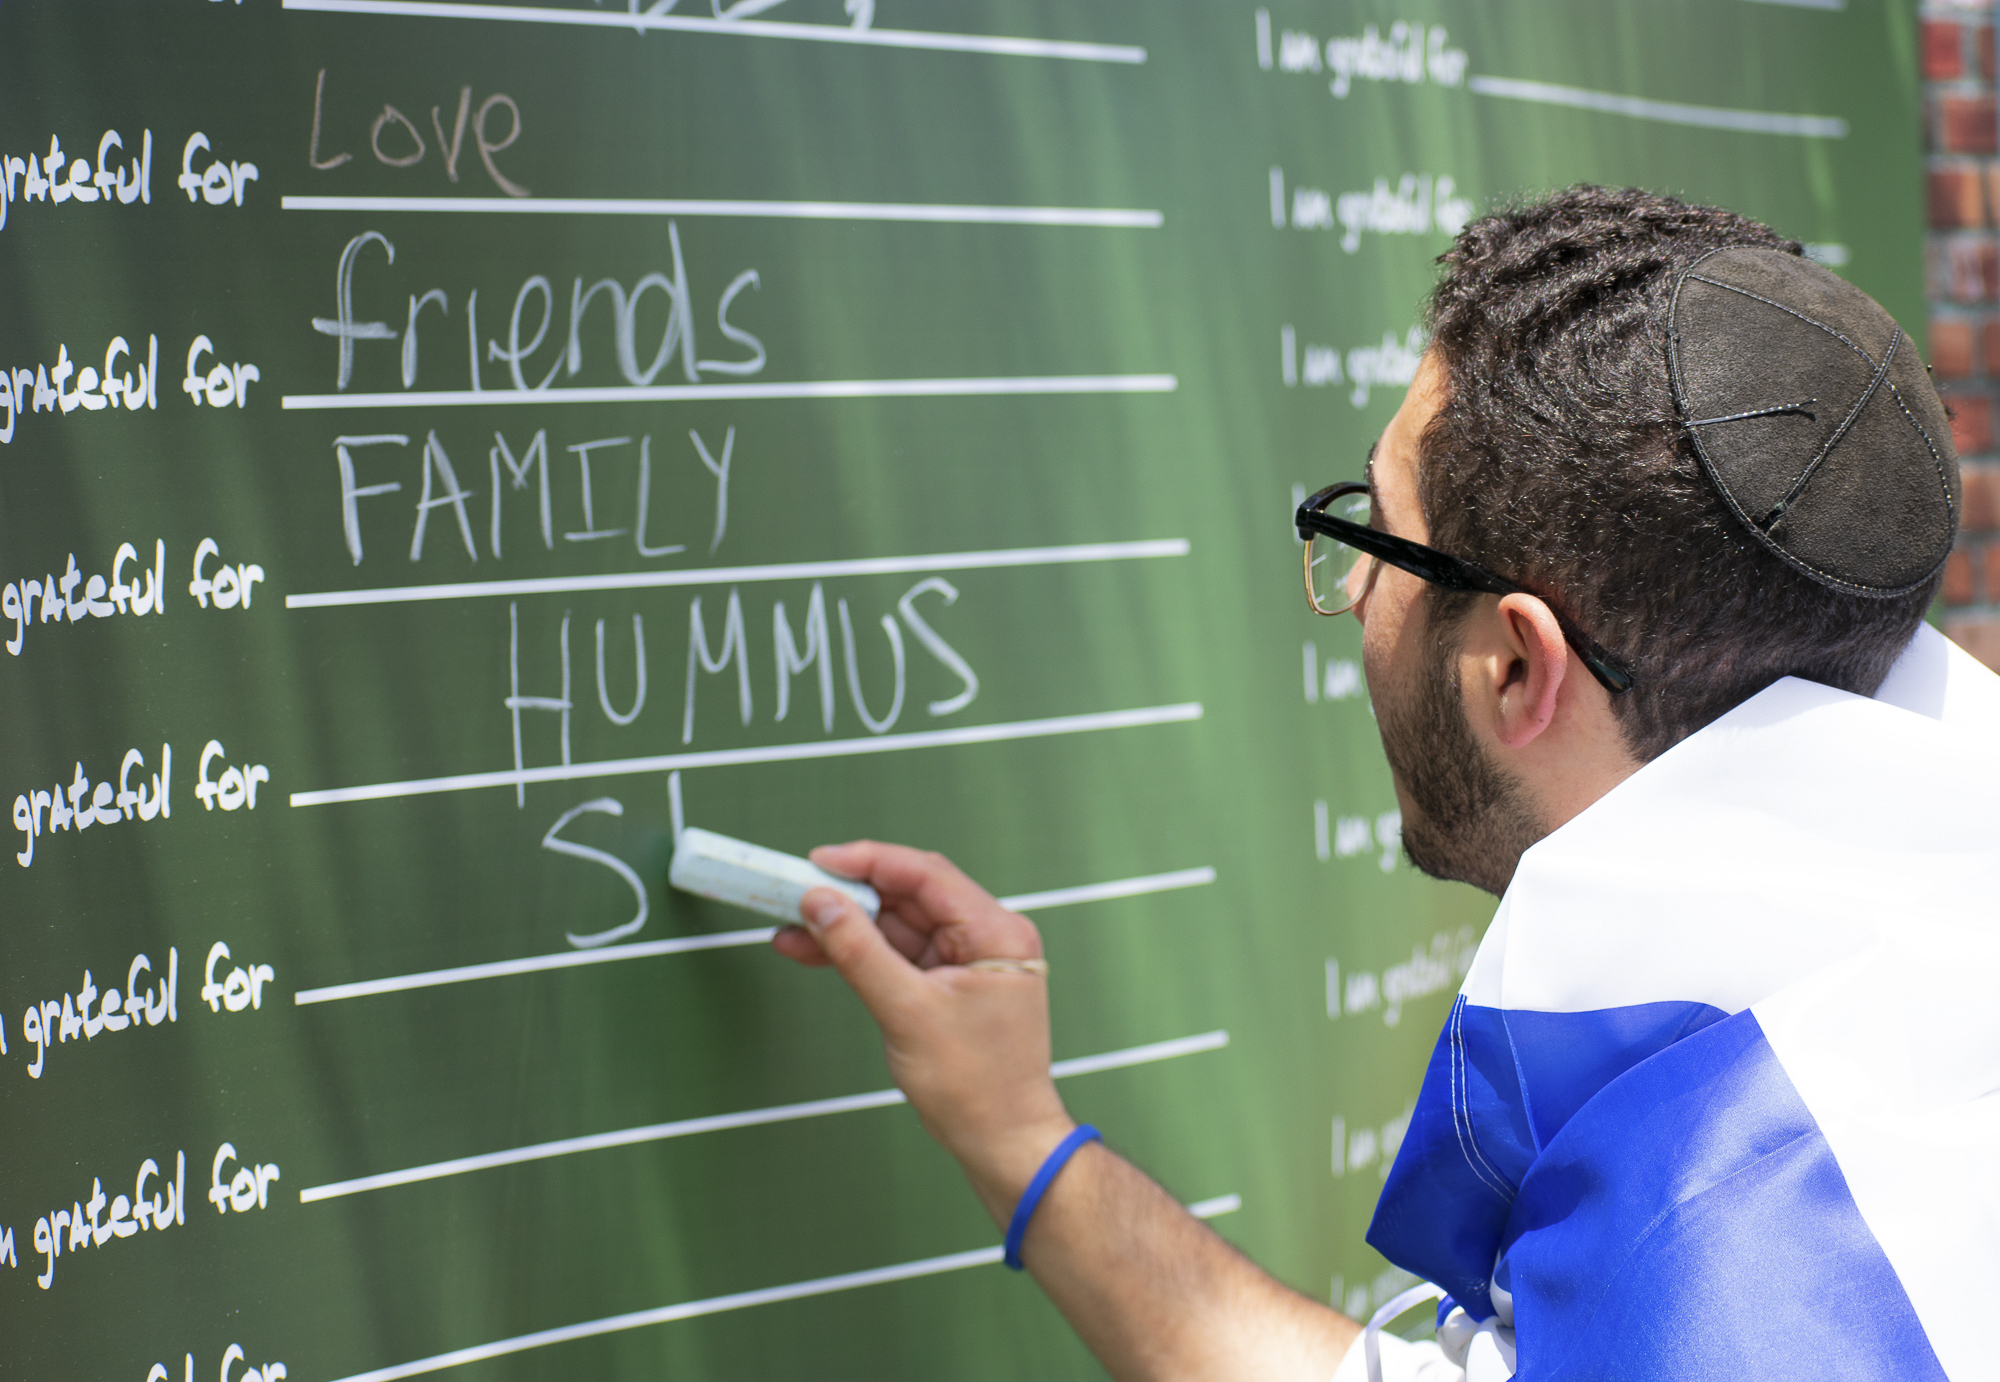  Isaac Shafa, a board member of the Students Supporting Israel club at Santa Monica College is in the midst of writing “shawarma” during an event put on by the club on Thursday, May 10 in Santa Monica, California. The event was a celebration for the 